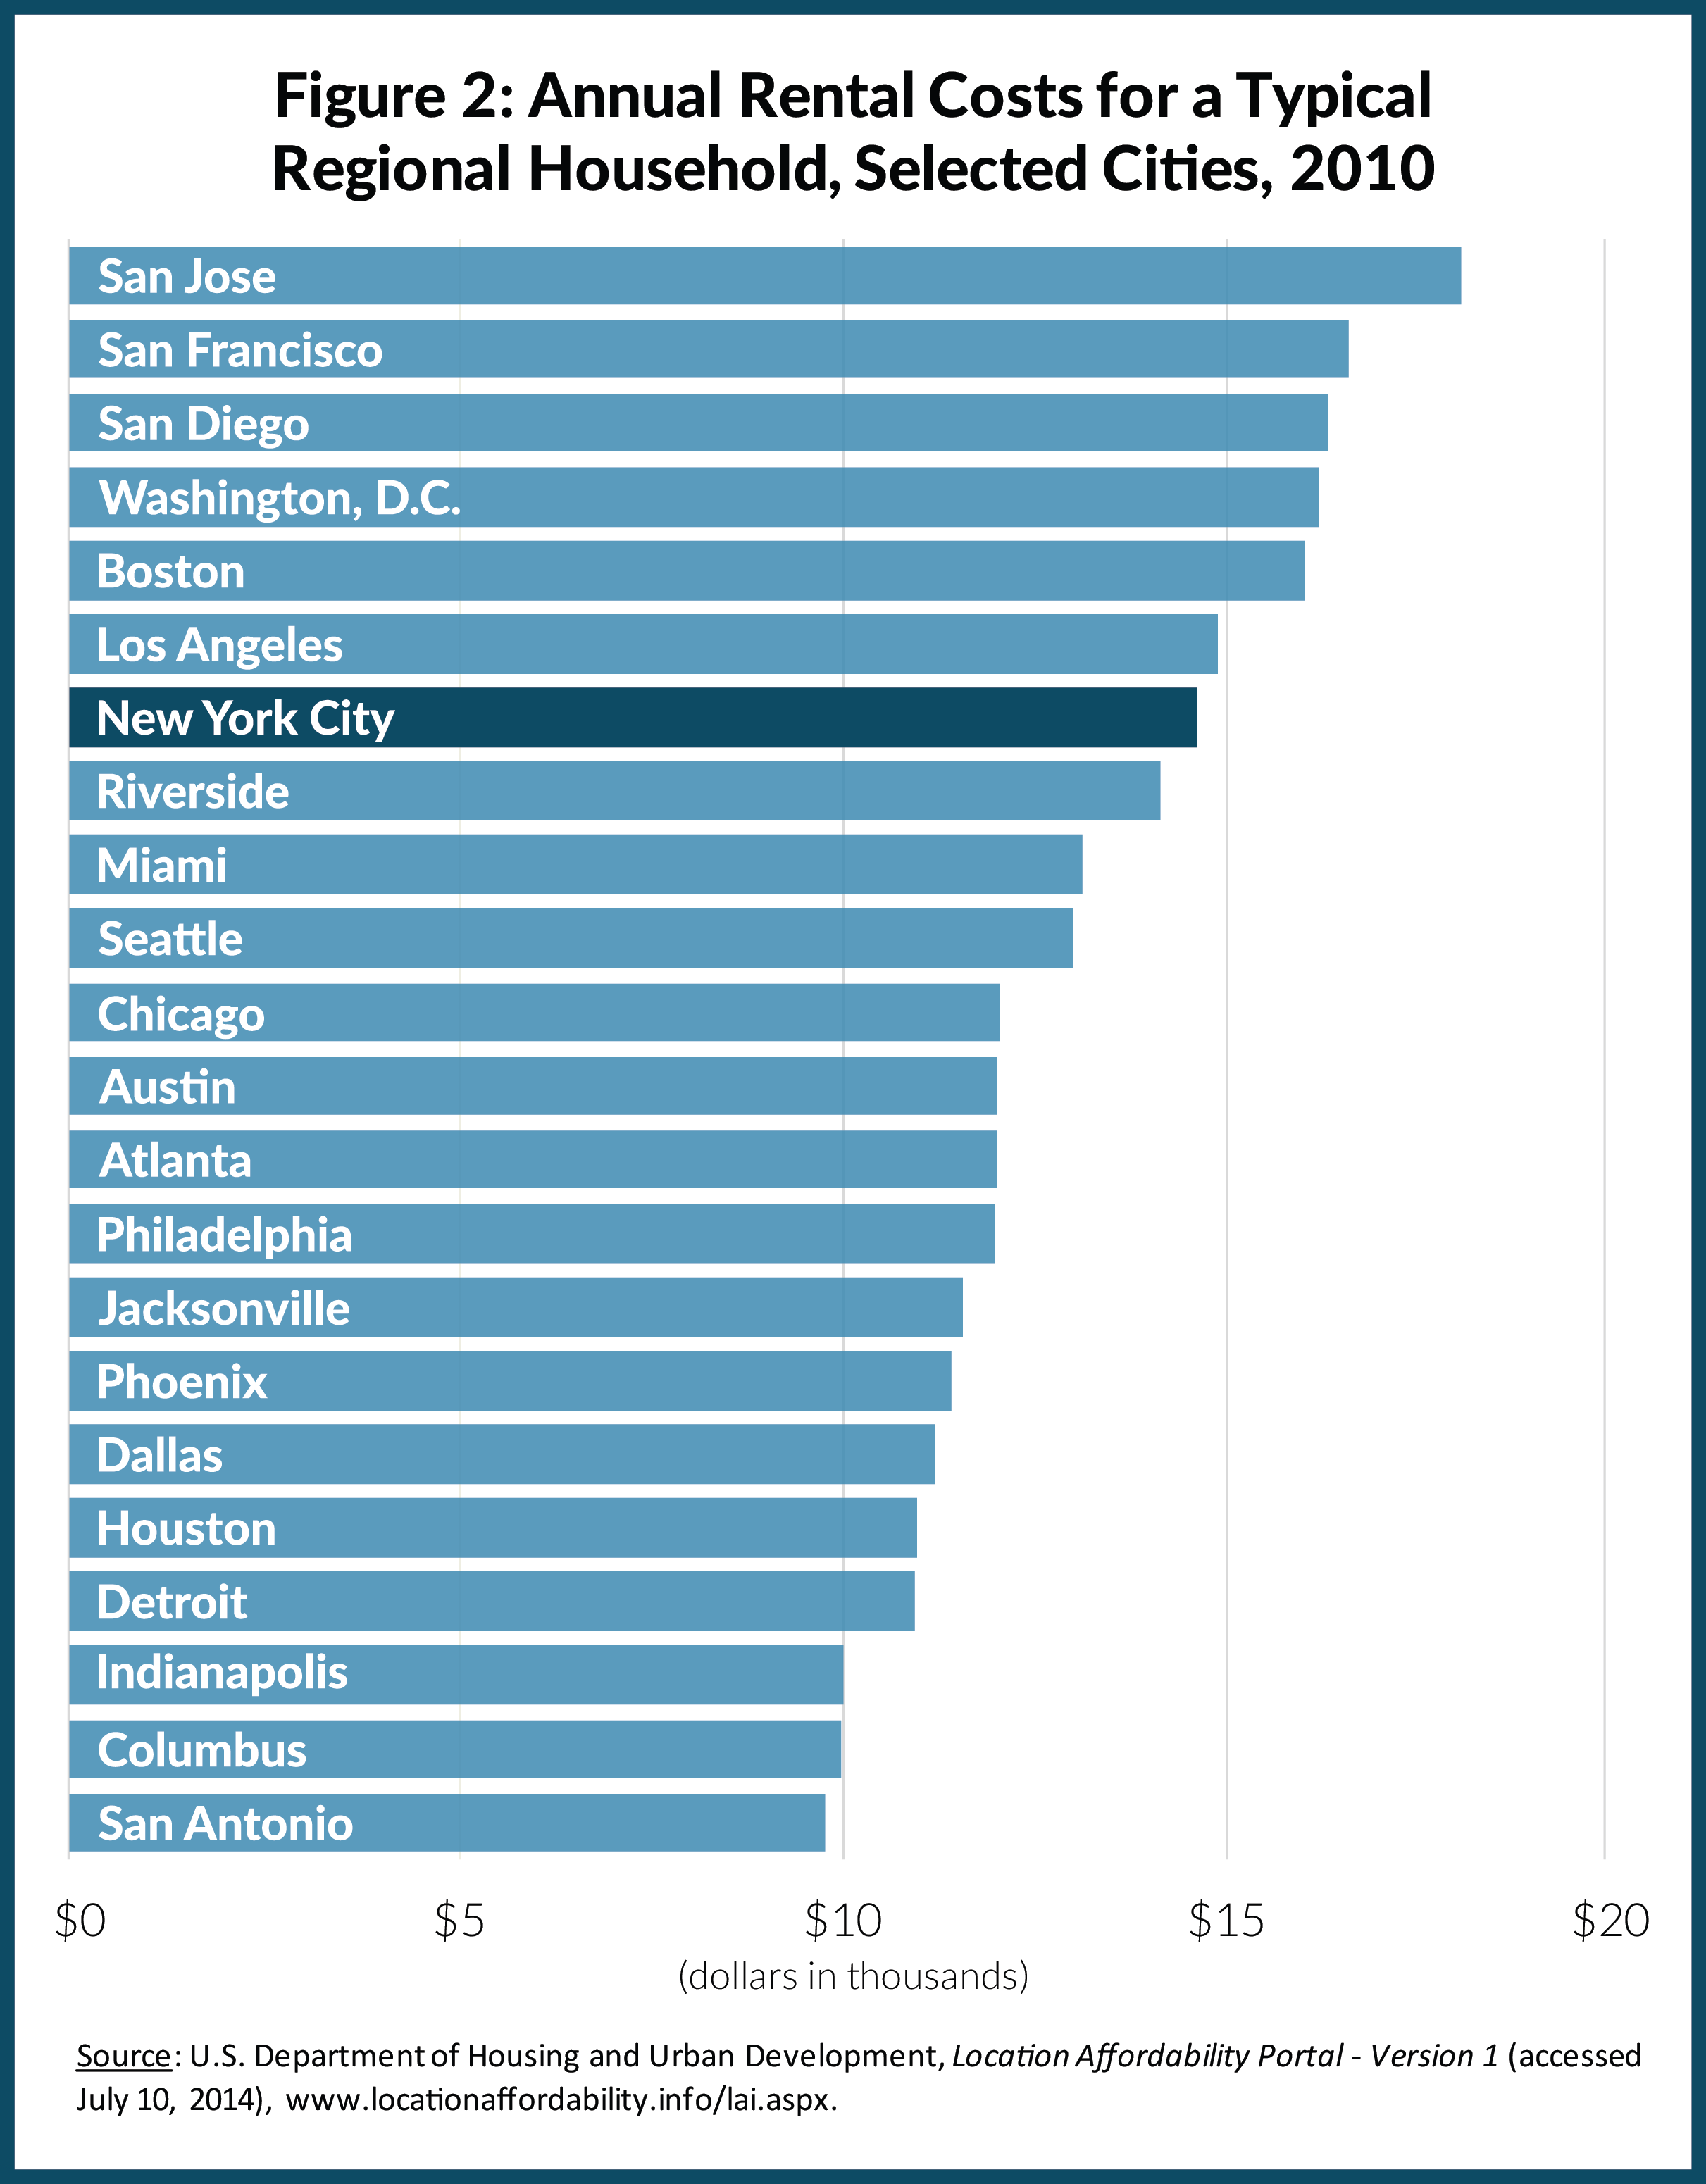 Figure 2: Annual Rental Costs for a Typical Regional Household, Selected Cities, 2010